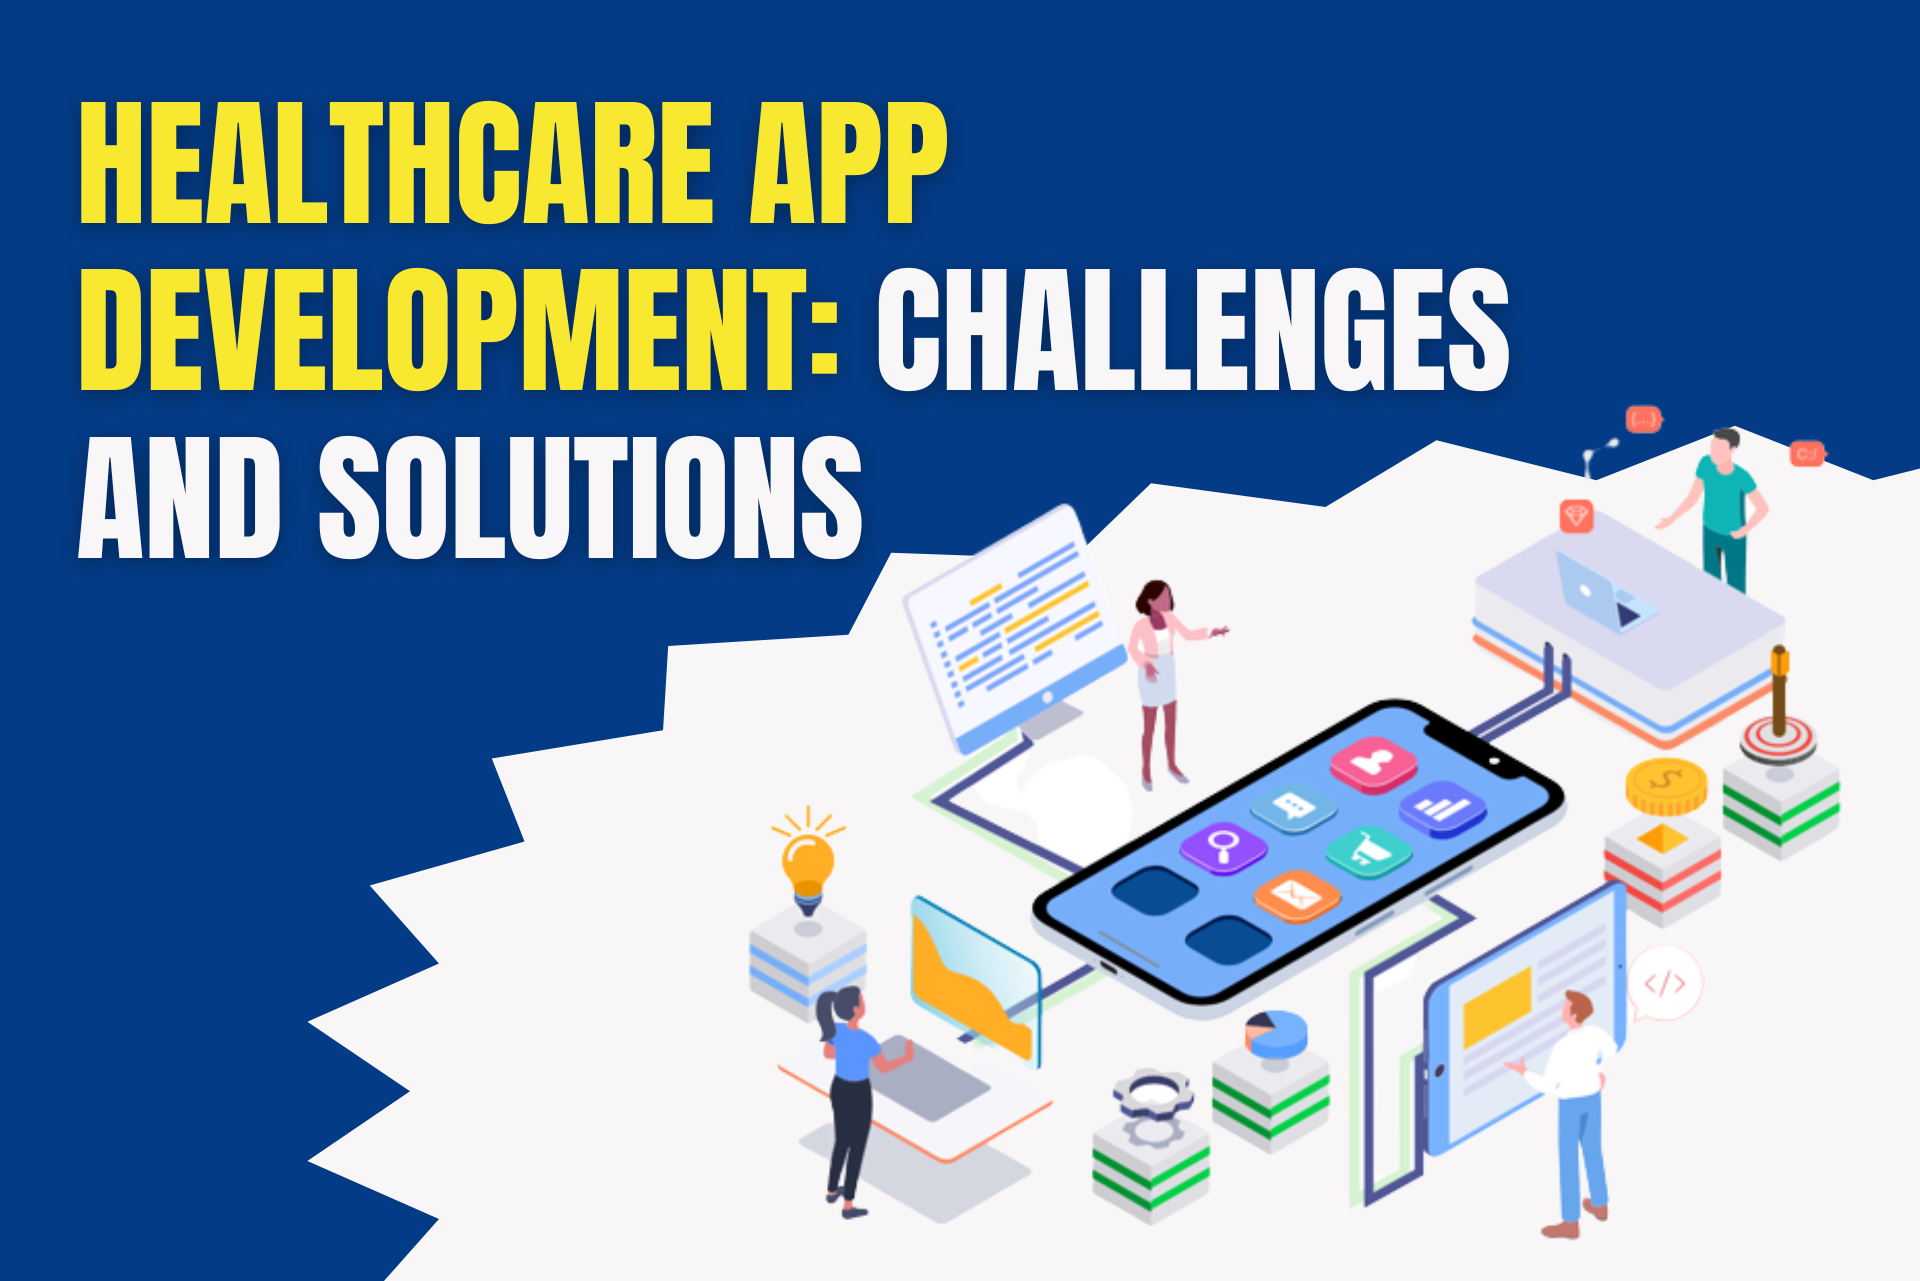 Healthcare App Development: Major Challenges and Solutions